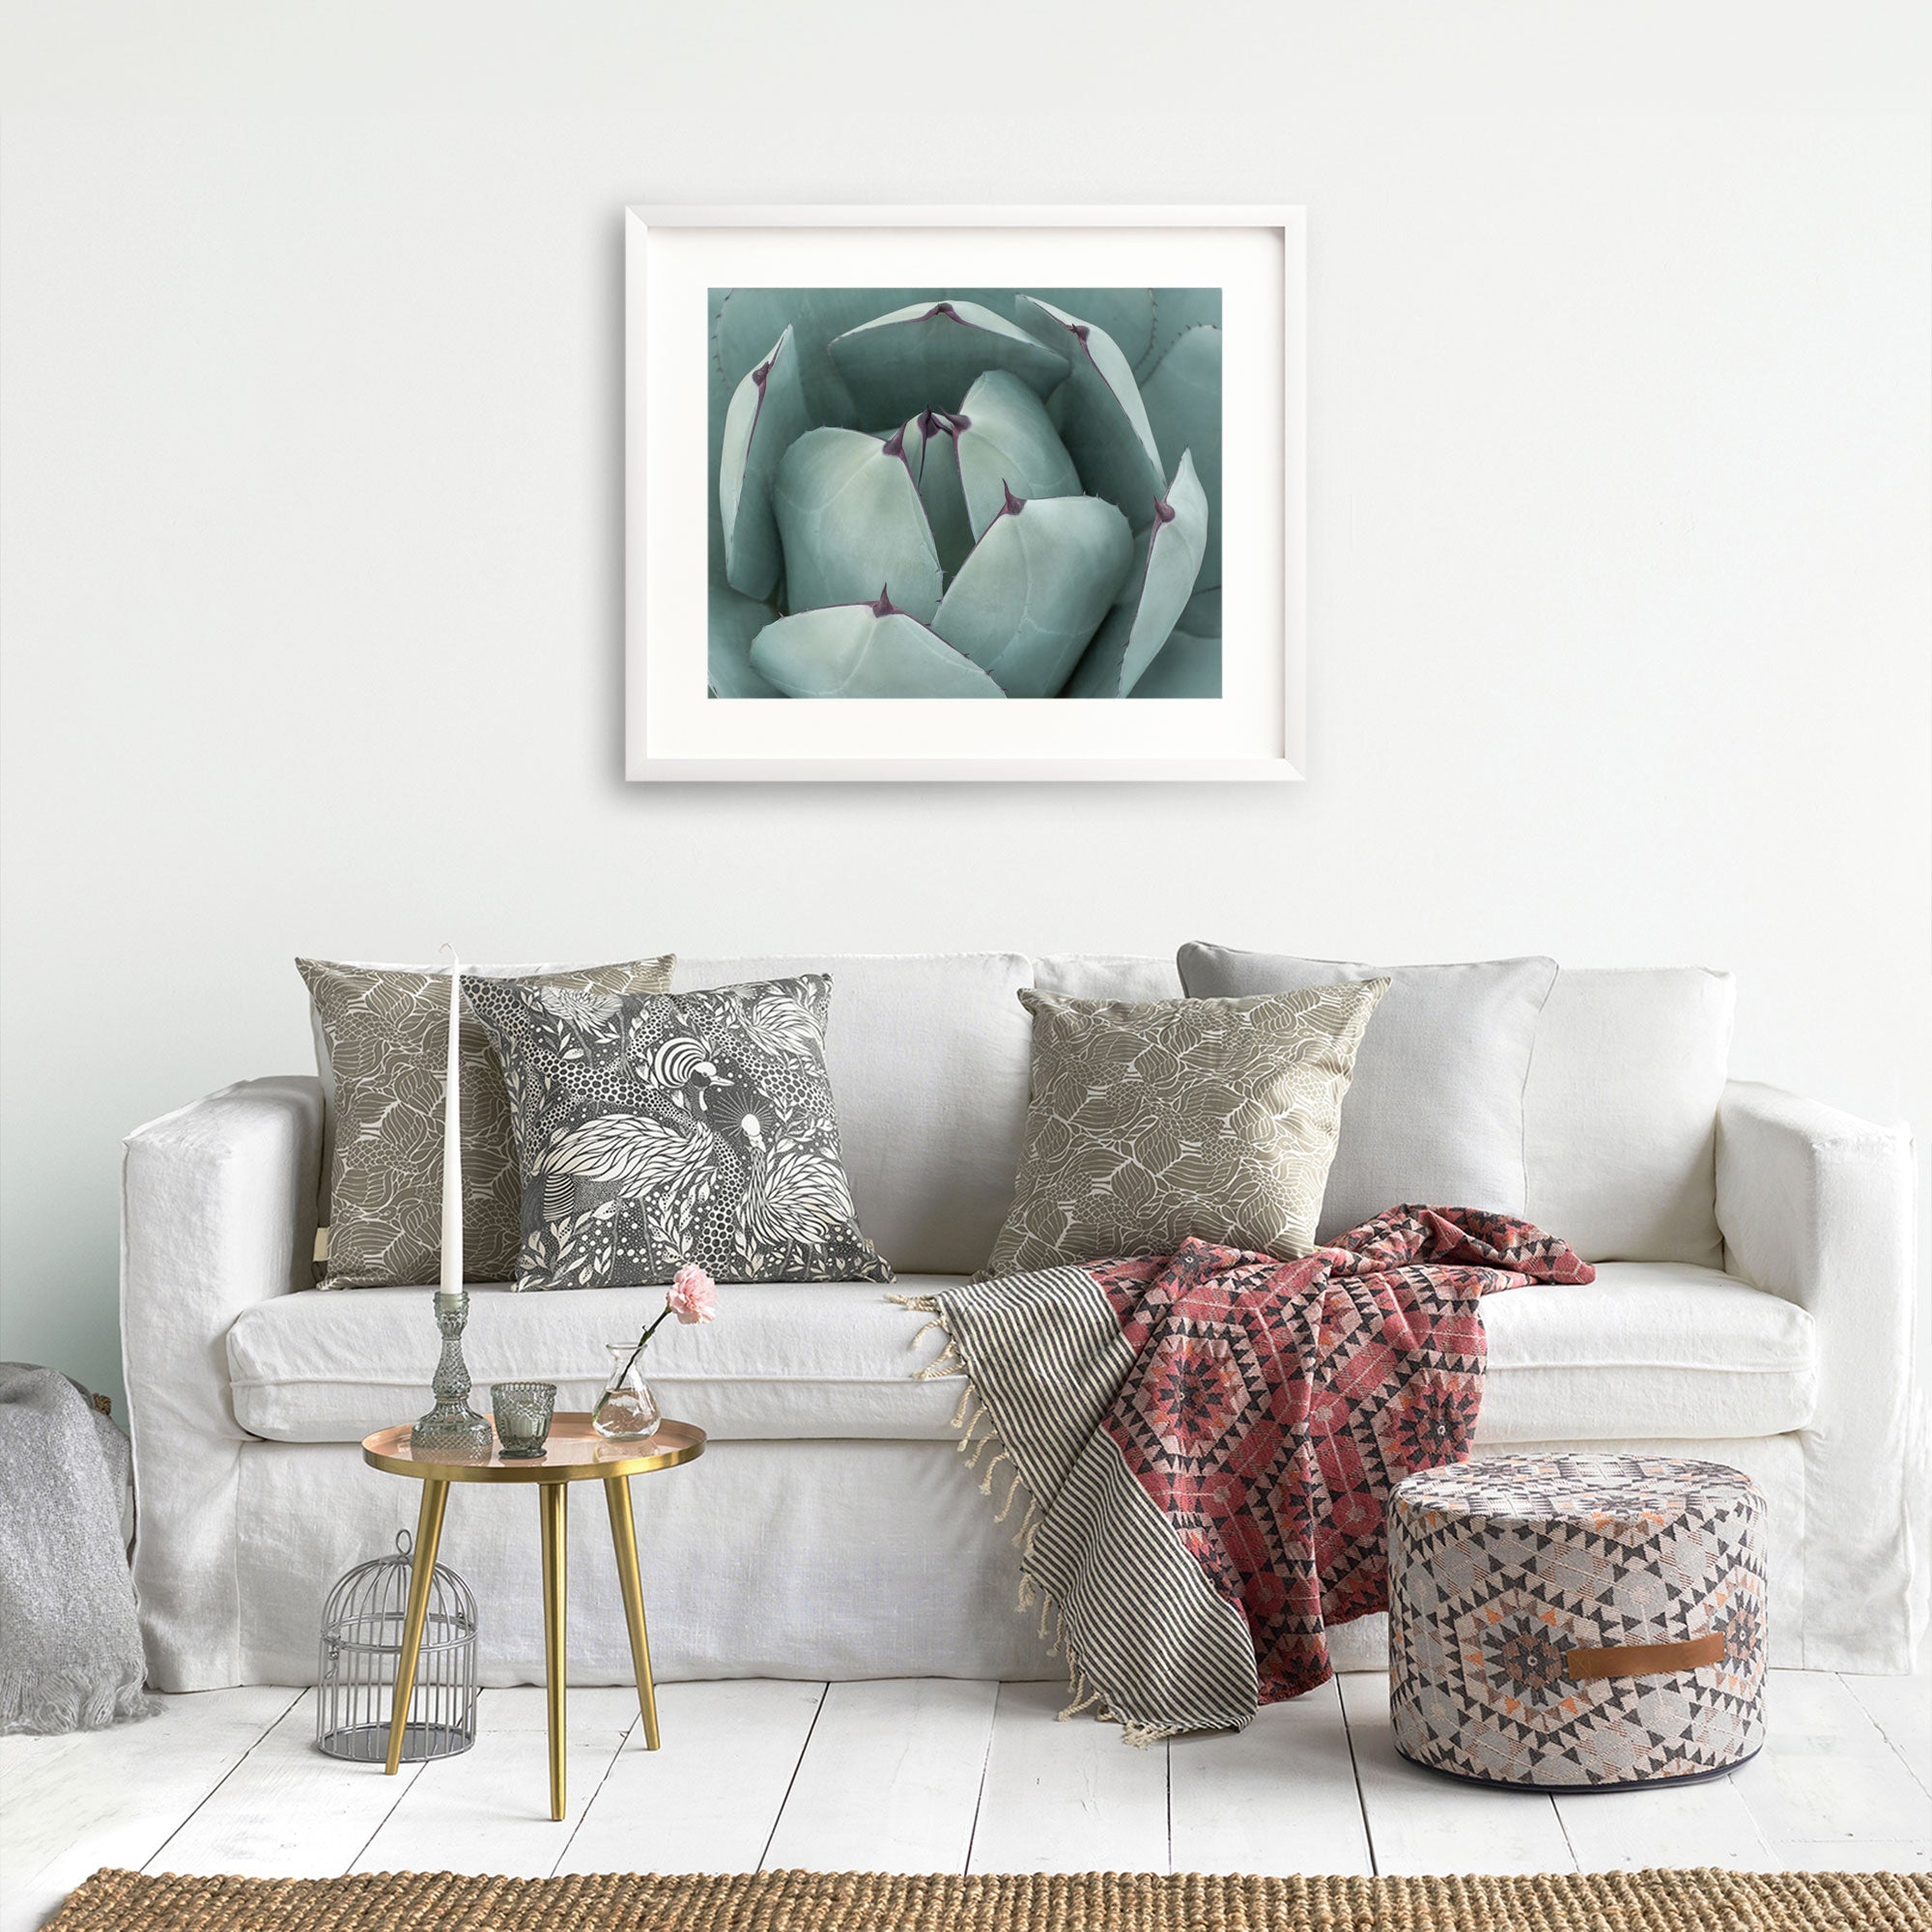 A cozy living room featuring a white sofa with decorative gray and black pillows, an Abstract Teal Green Botanical Print, 'Teal Petals' by Offley Green above it, a small round table with books, and a red patterned throw